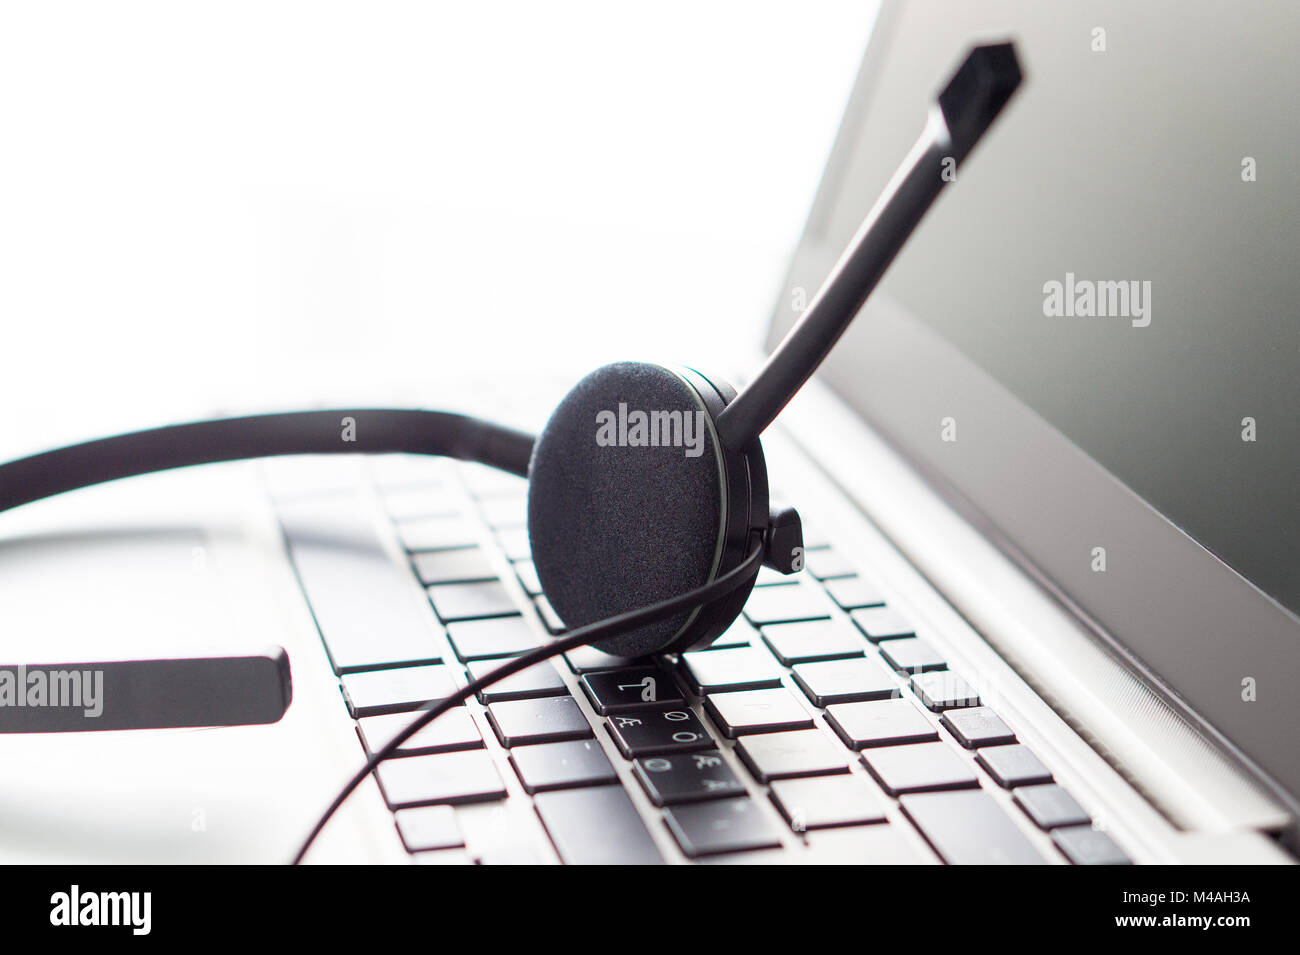 Help desk, customer service, support hotline or call center concept. Close up of headset on laptop keyboard. Video call conference or telemarketing. Stock Photo